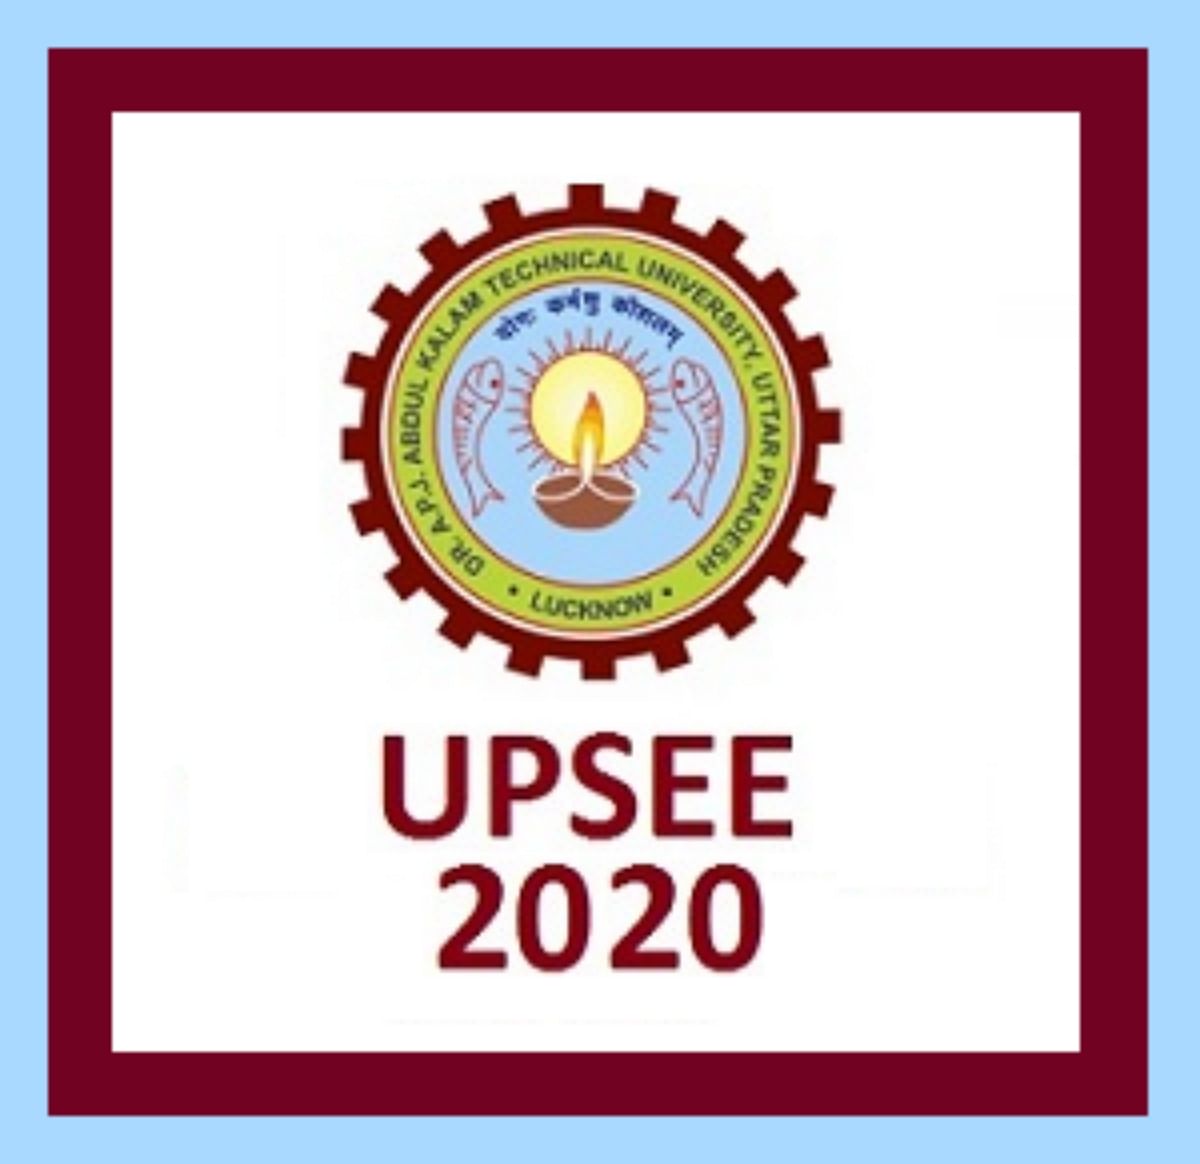 UPSEE 2020: Application Form Last Date Extended Again, Simple Steps to Apply